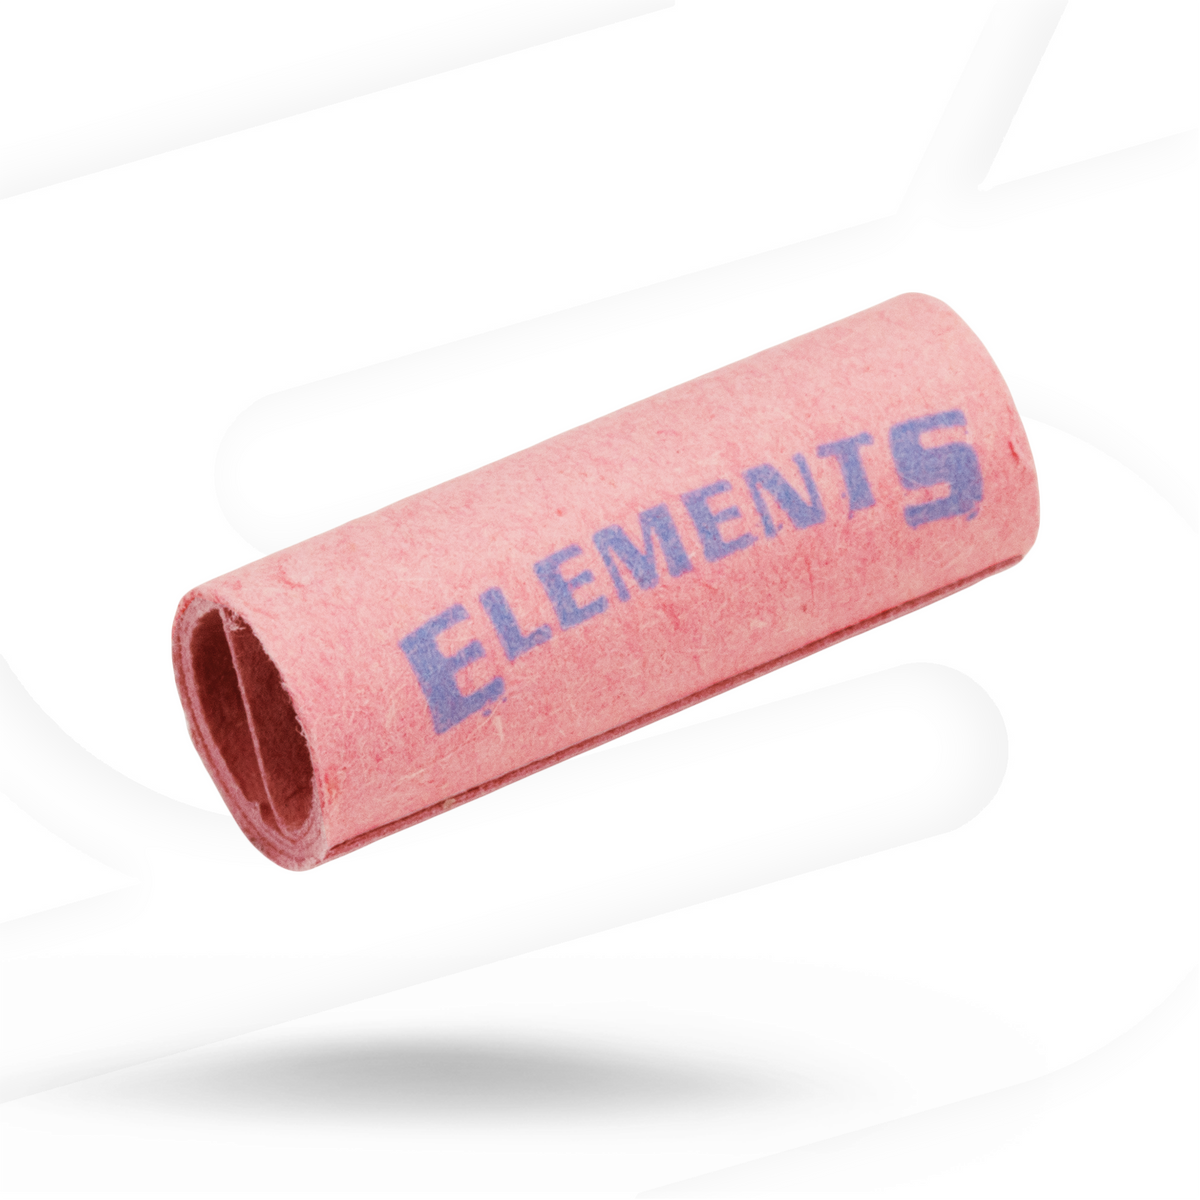 Elements Pre-Rolled Tips Rolling Tips esd-official